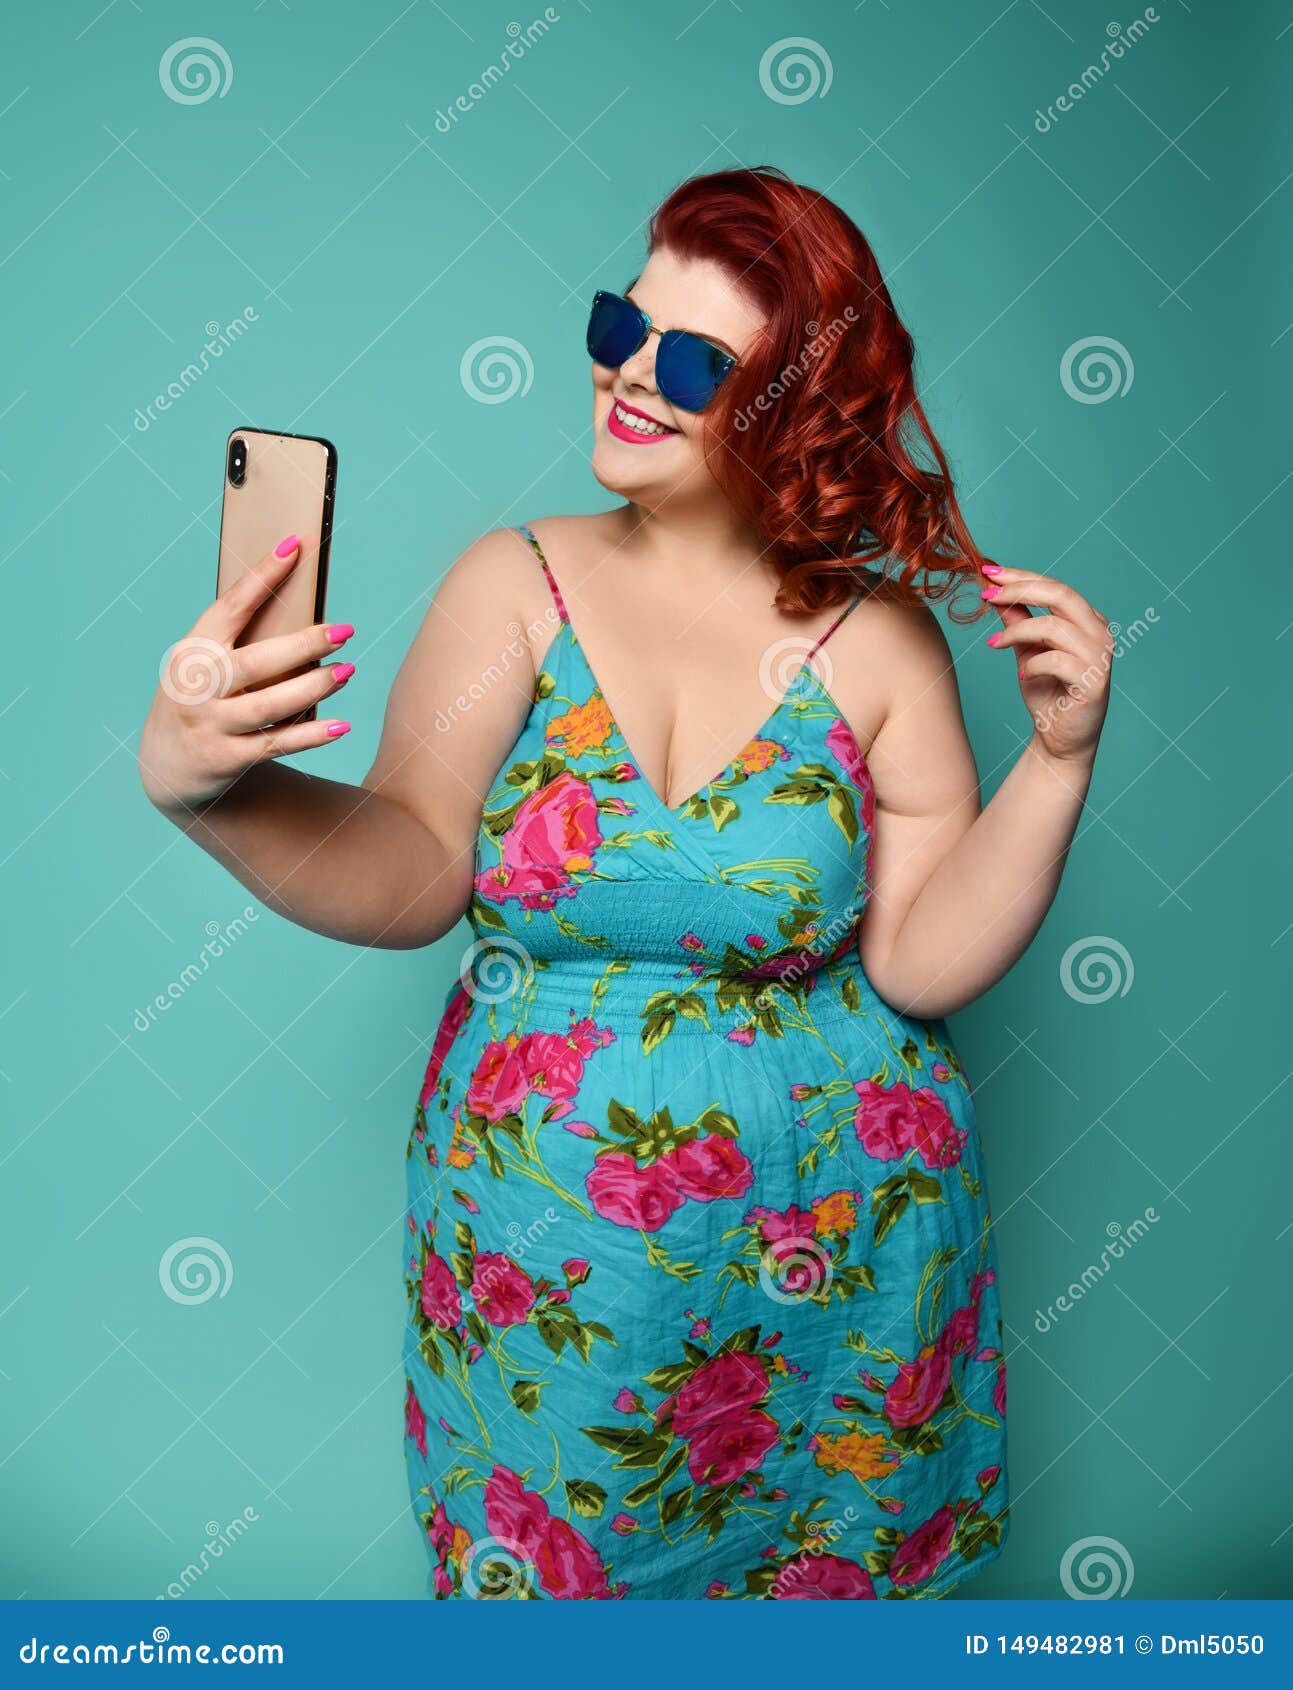 Pretty Plus-size Fat Woman with Hollywood Smile in Fashion Sunglasses and  Colorful Clothes Does Fashion Selfie on Mint Stock Image - Image of female,  flowers: 149482981